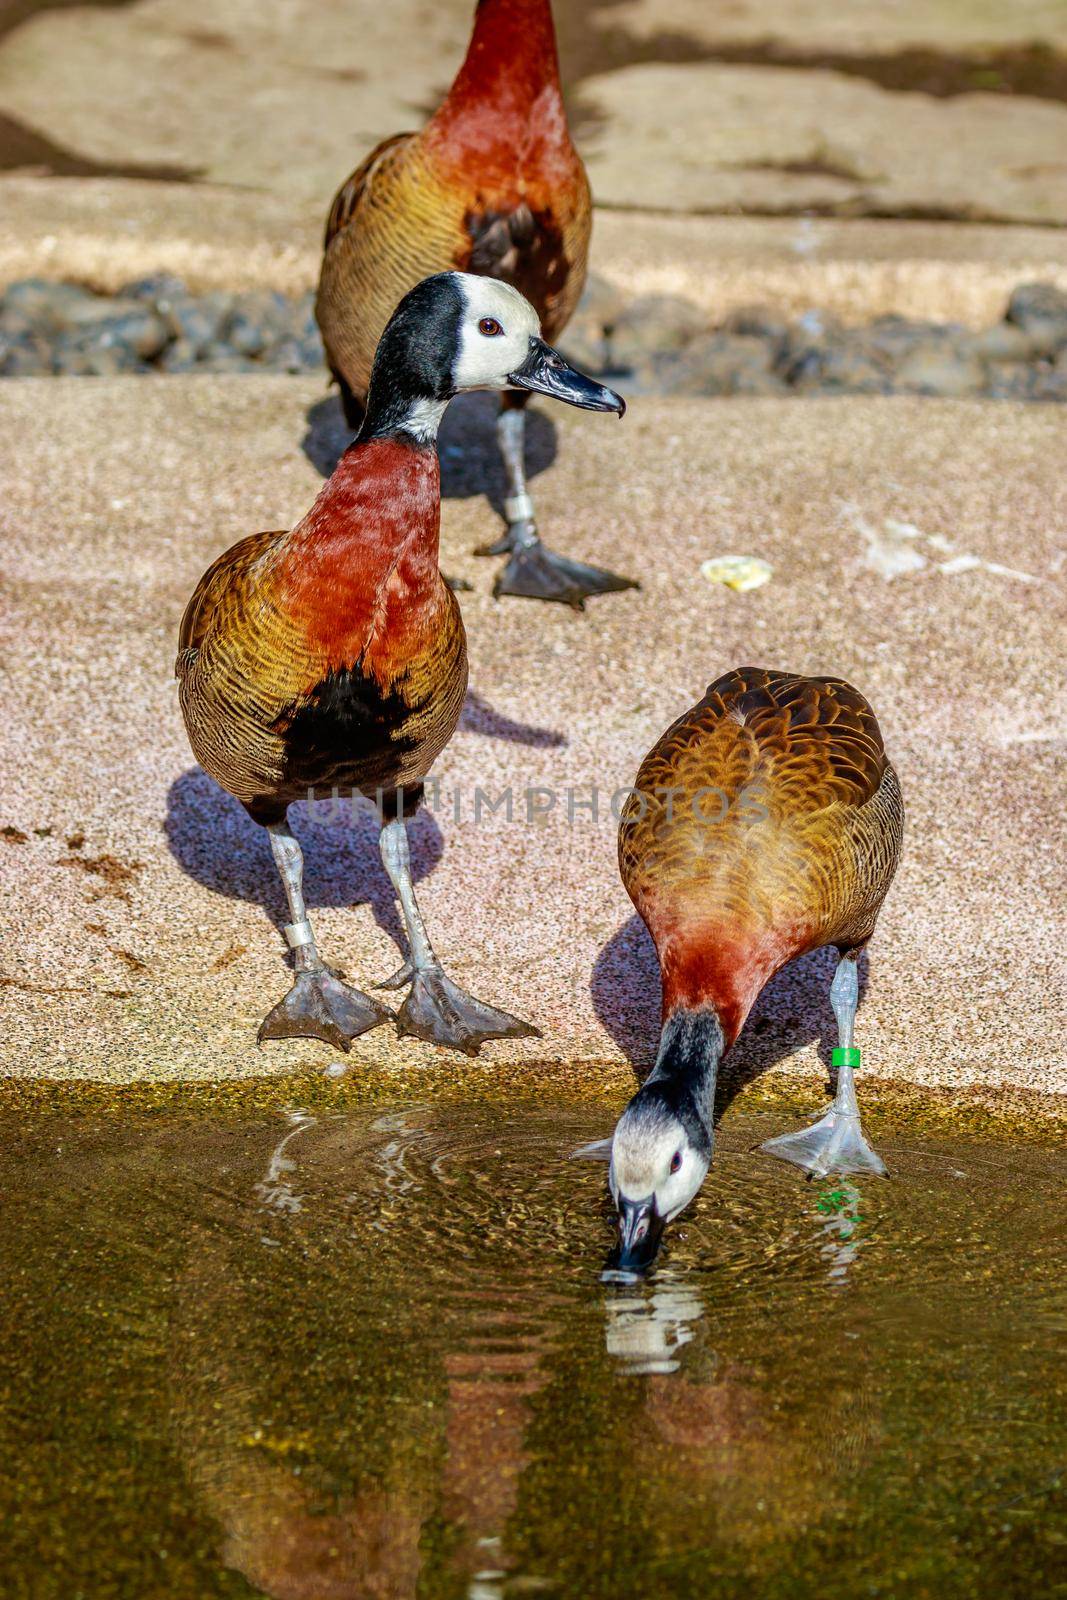 A group of White-faced Whistling ducks hang around leisurely.